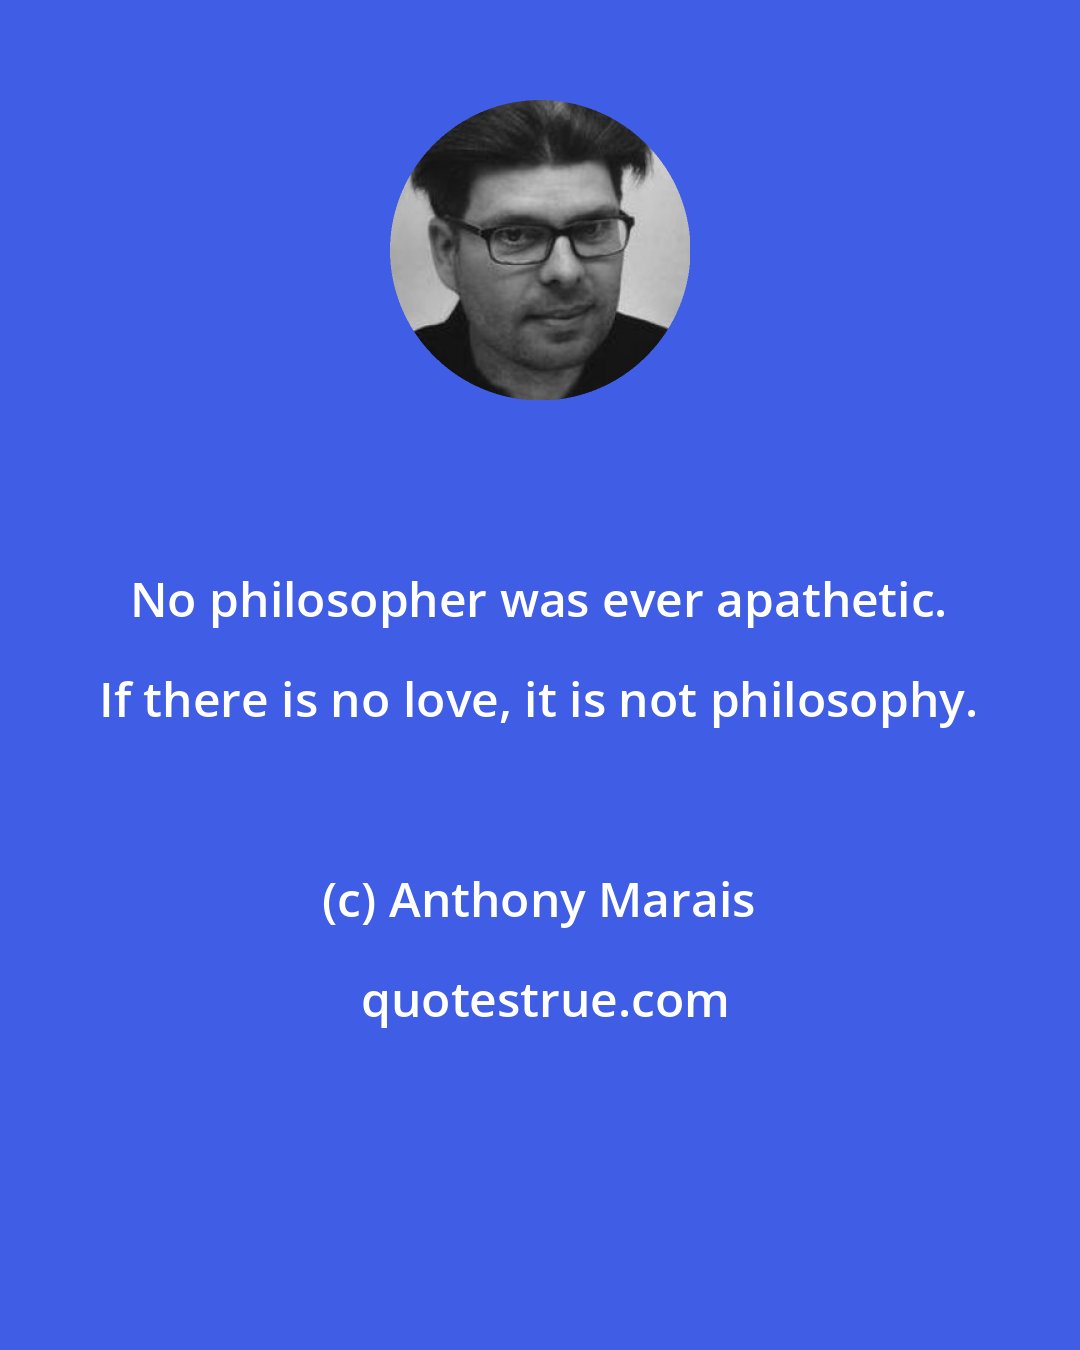 Anthony Marais: No philosopher was ever apathetic. If there is no love, it is not philosophy.